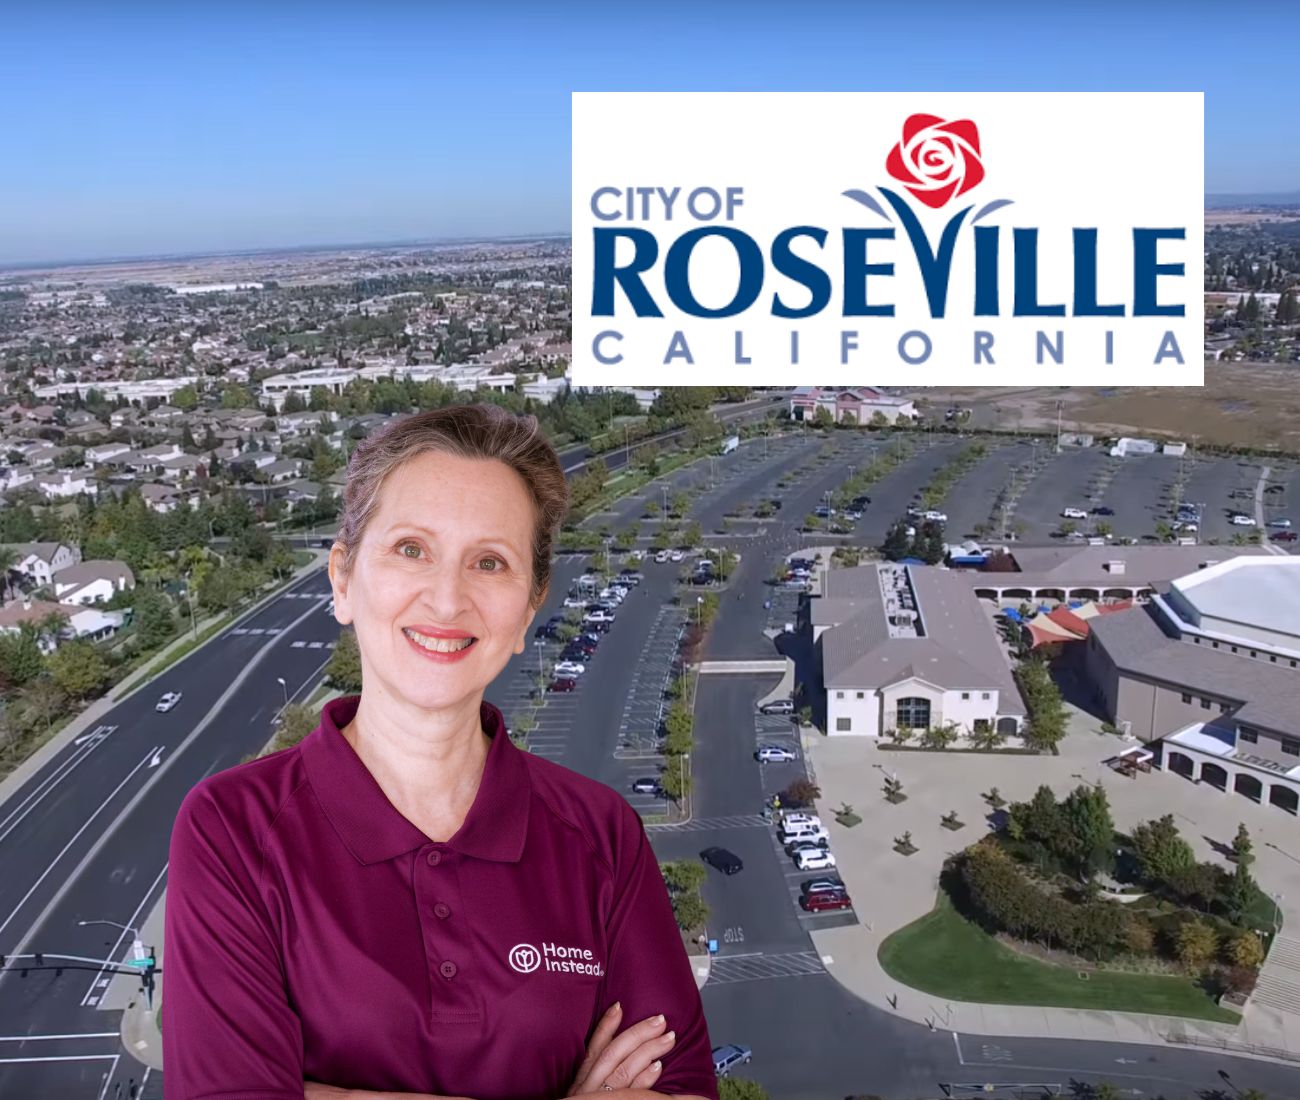 Home Instead caregiver with Roseville California in the background